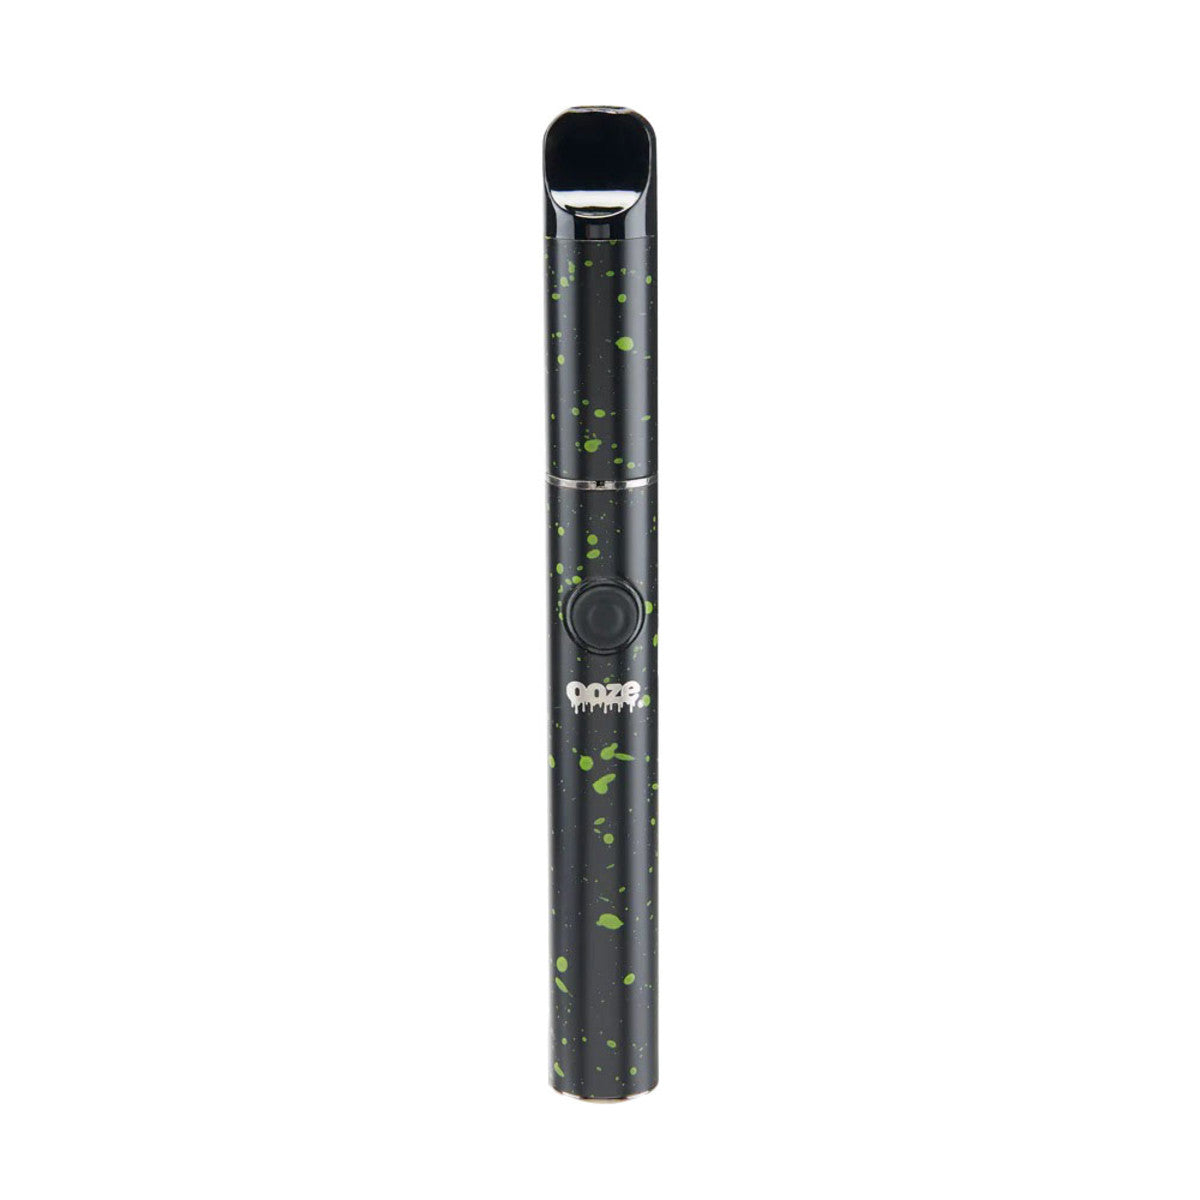 Ooze Signal Concentrate Wax Vaporizer Pen